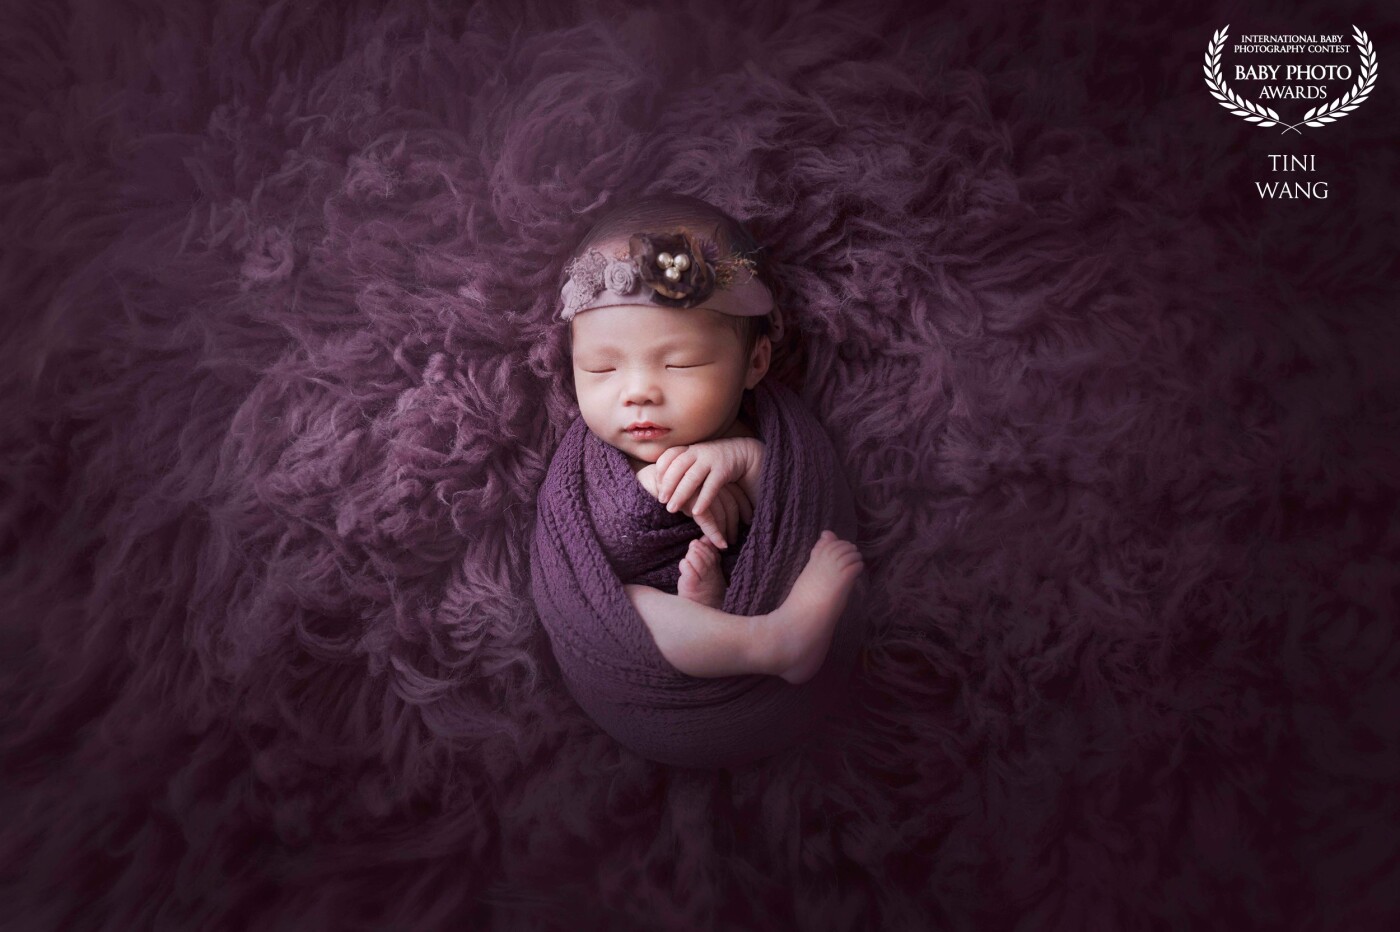 My baby client’s mother adores pink and purple, so I used a purple rug for the background to not only add color, but a soft texture to the photo. The swaddle blanket is a similar shade of purple that keeps my little client comfy and cozy. The pearl headband adorns her head to emphasize the delicate newborn.